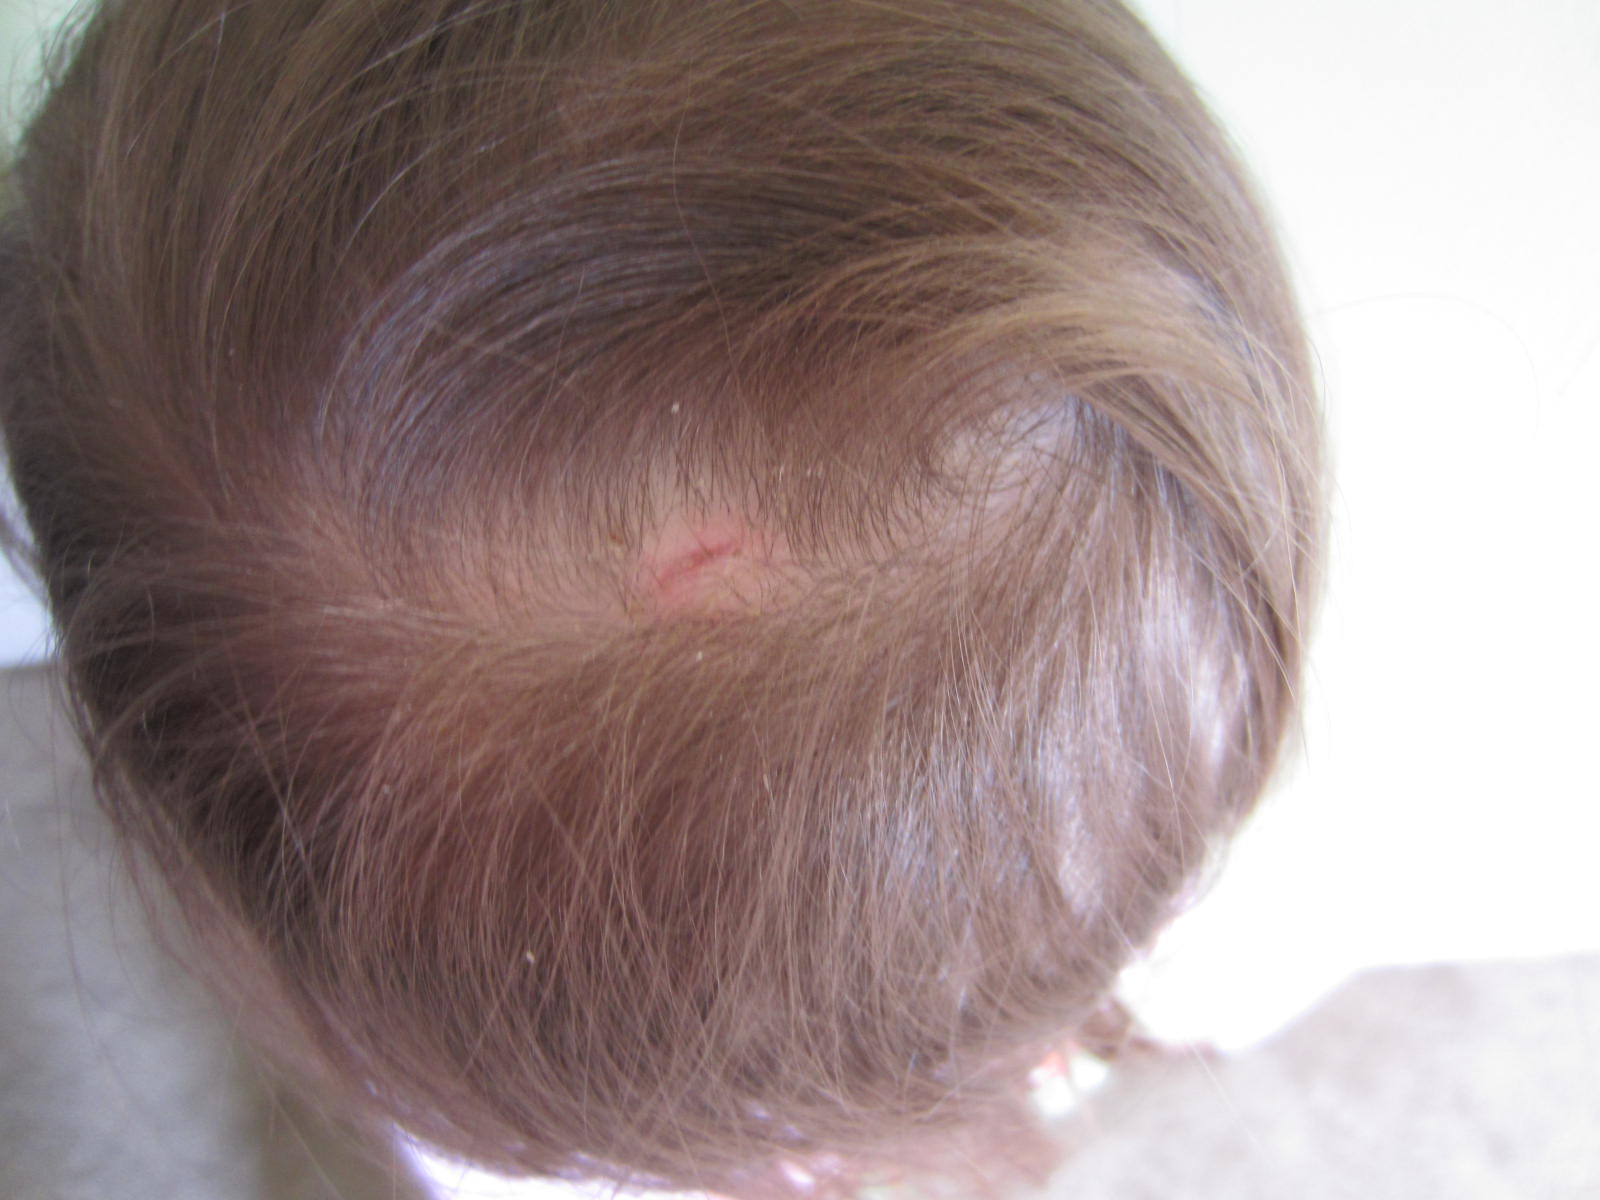 Head Lice Eggs, Nits | Lice Egg Picture